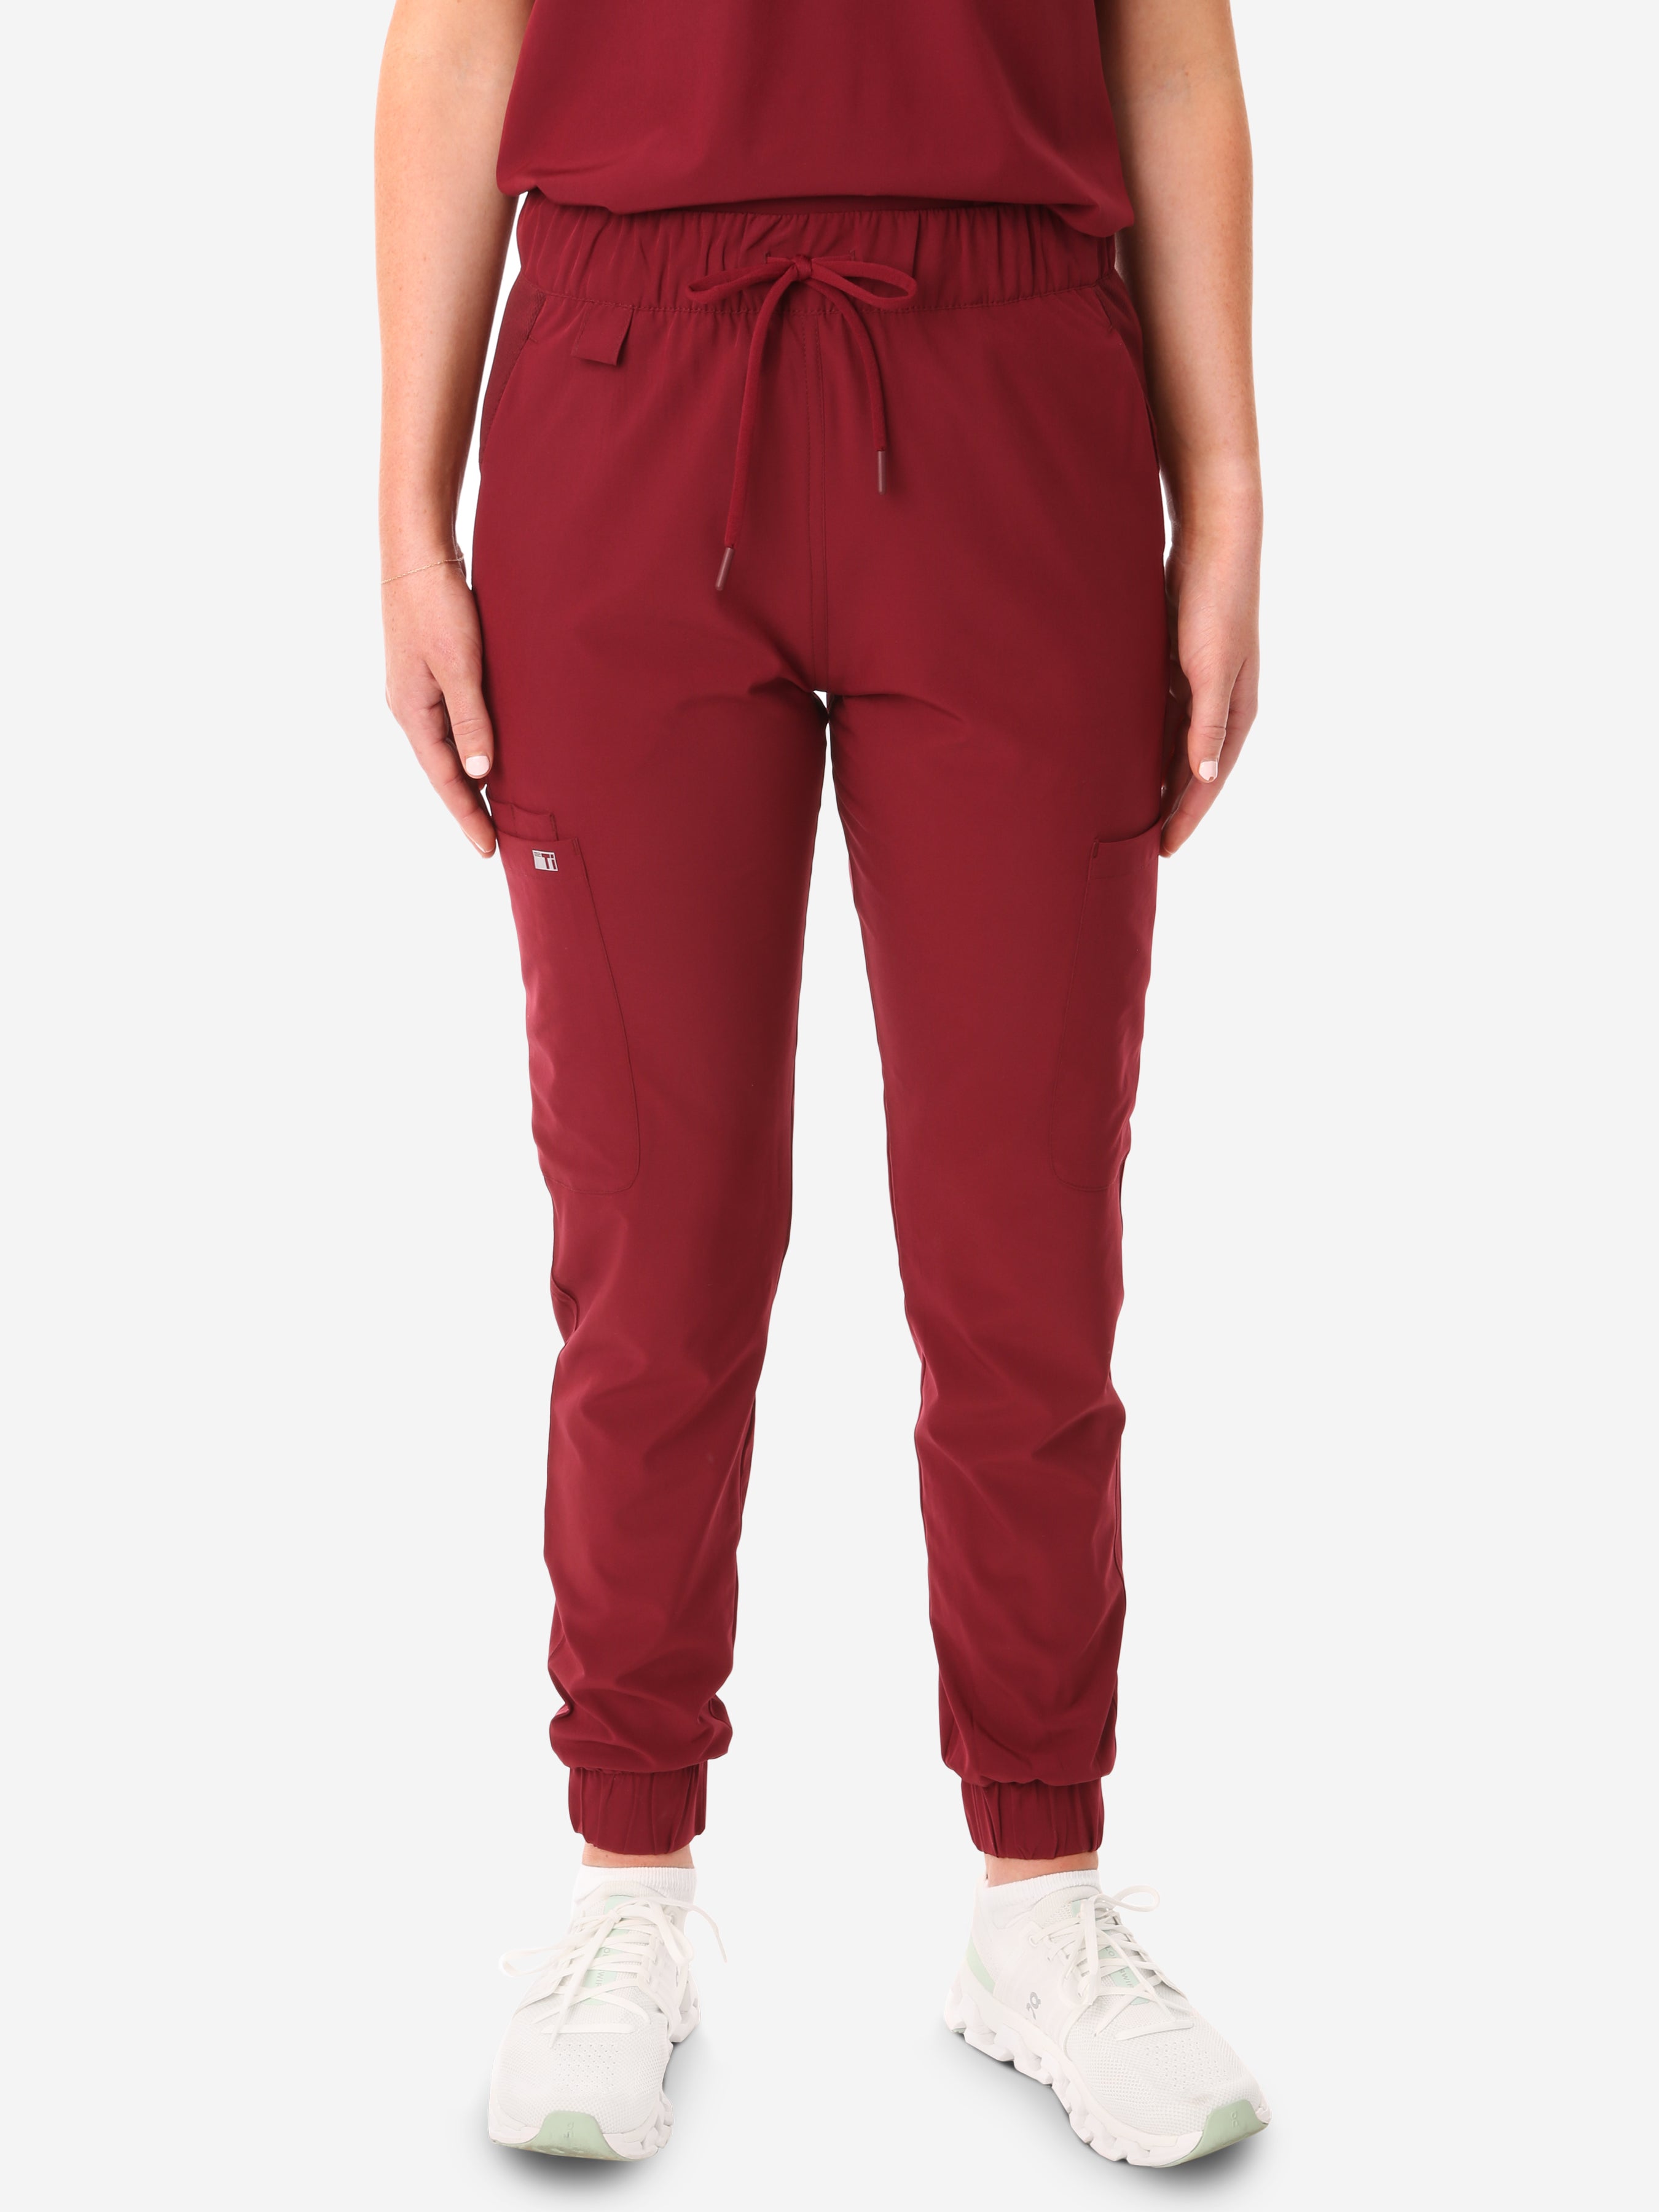 TiScrubs Bold Burgundy Women&#39;s Stretch Perfect Jogger Pants Front View Pants Only